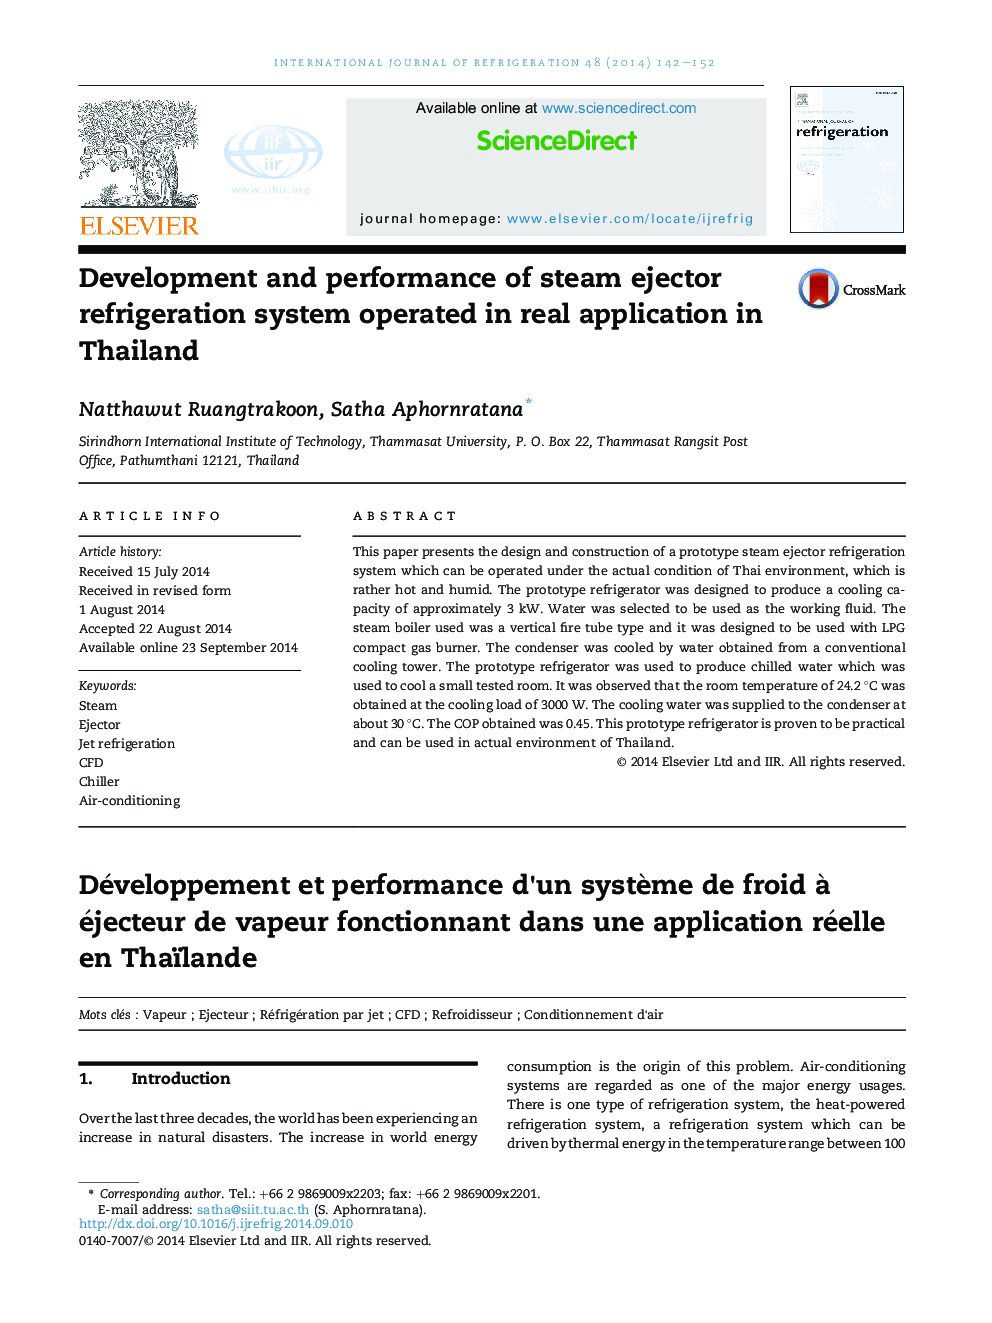 Development and performance of steam ejector refrigeration system operated in real application in Thailand